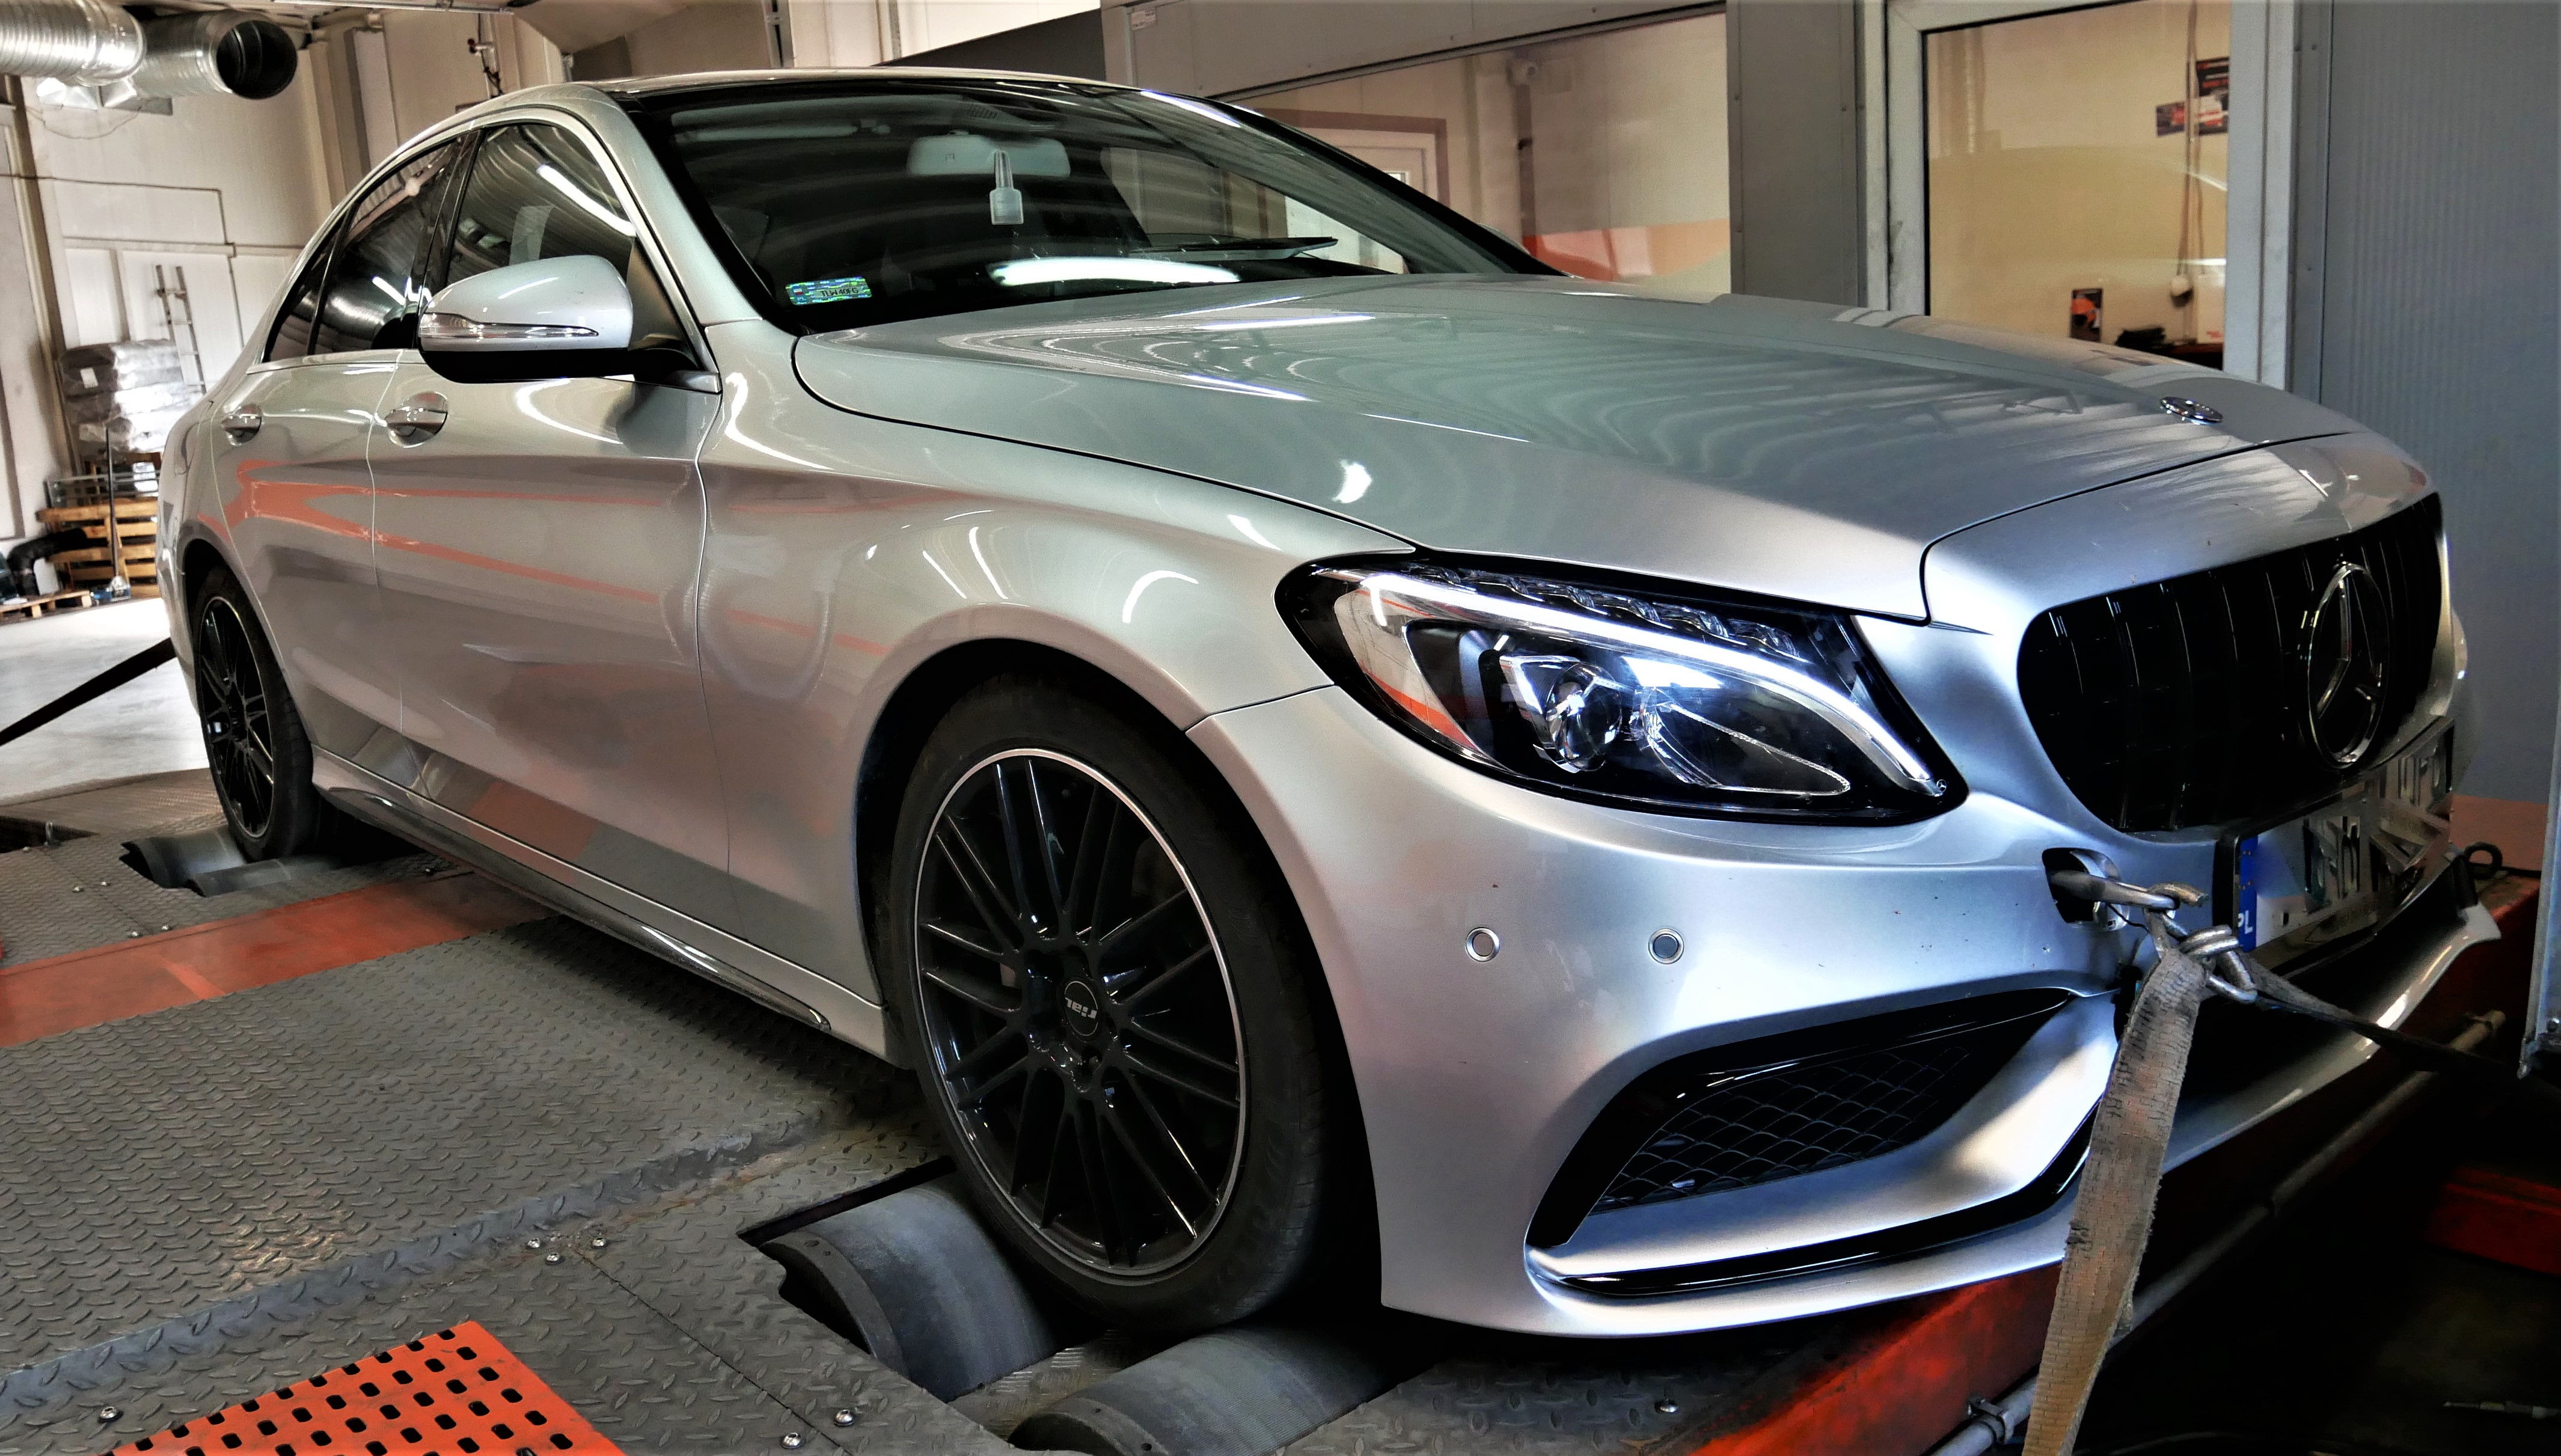 CHIPTUNING MERCEDES C300 2.0T 245KM - STAGE 1